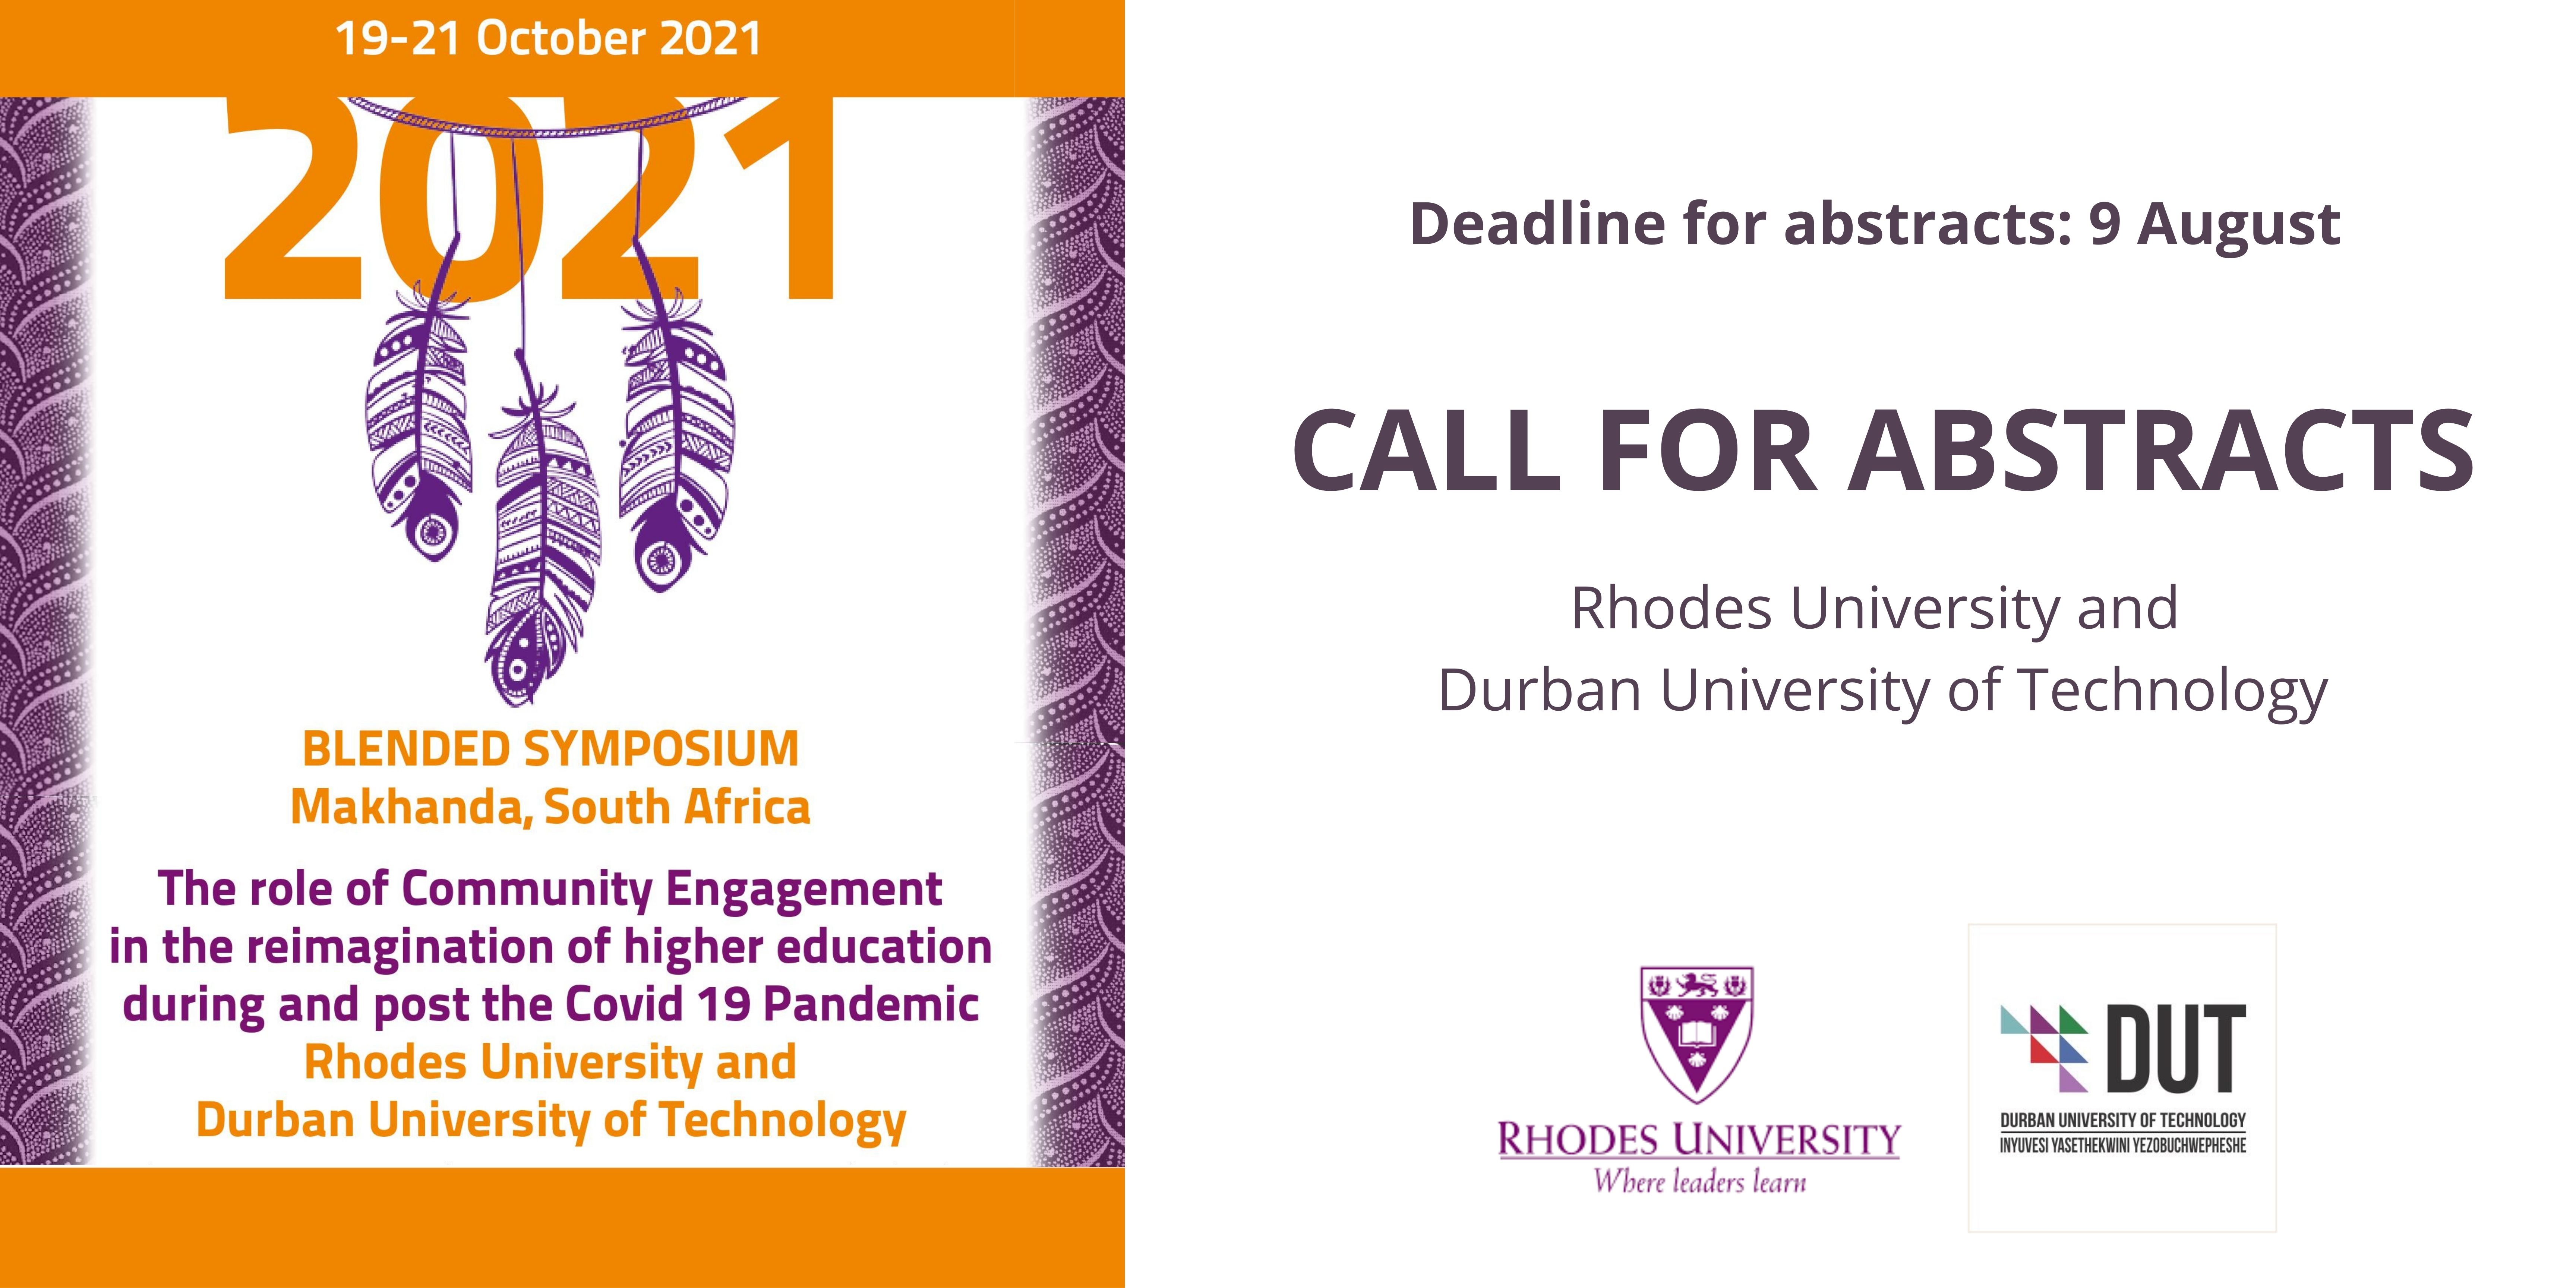 RCE SYMPOSIUM 2021: Call for abstracts